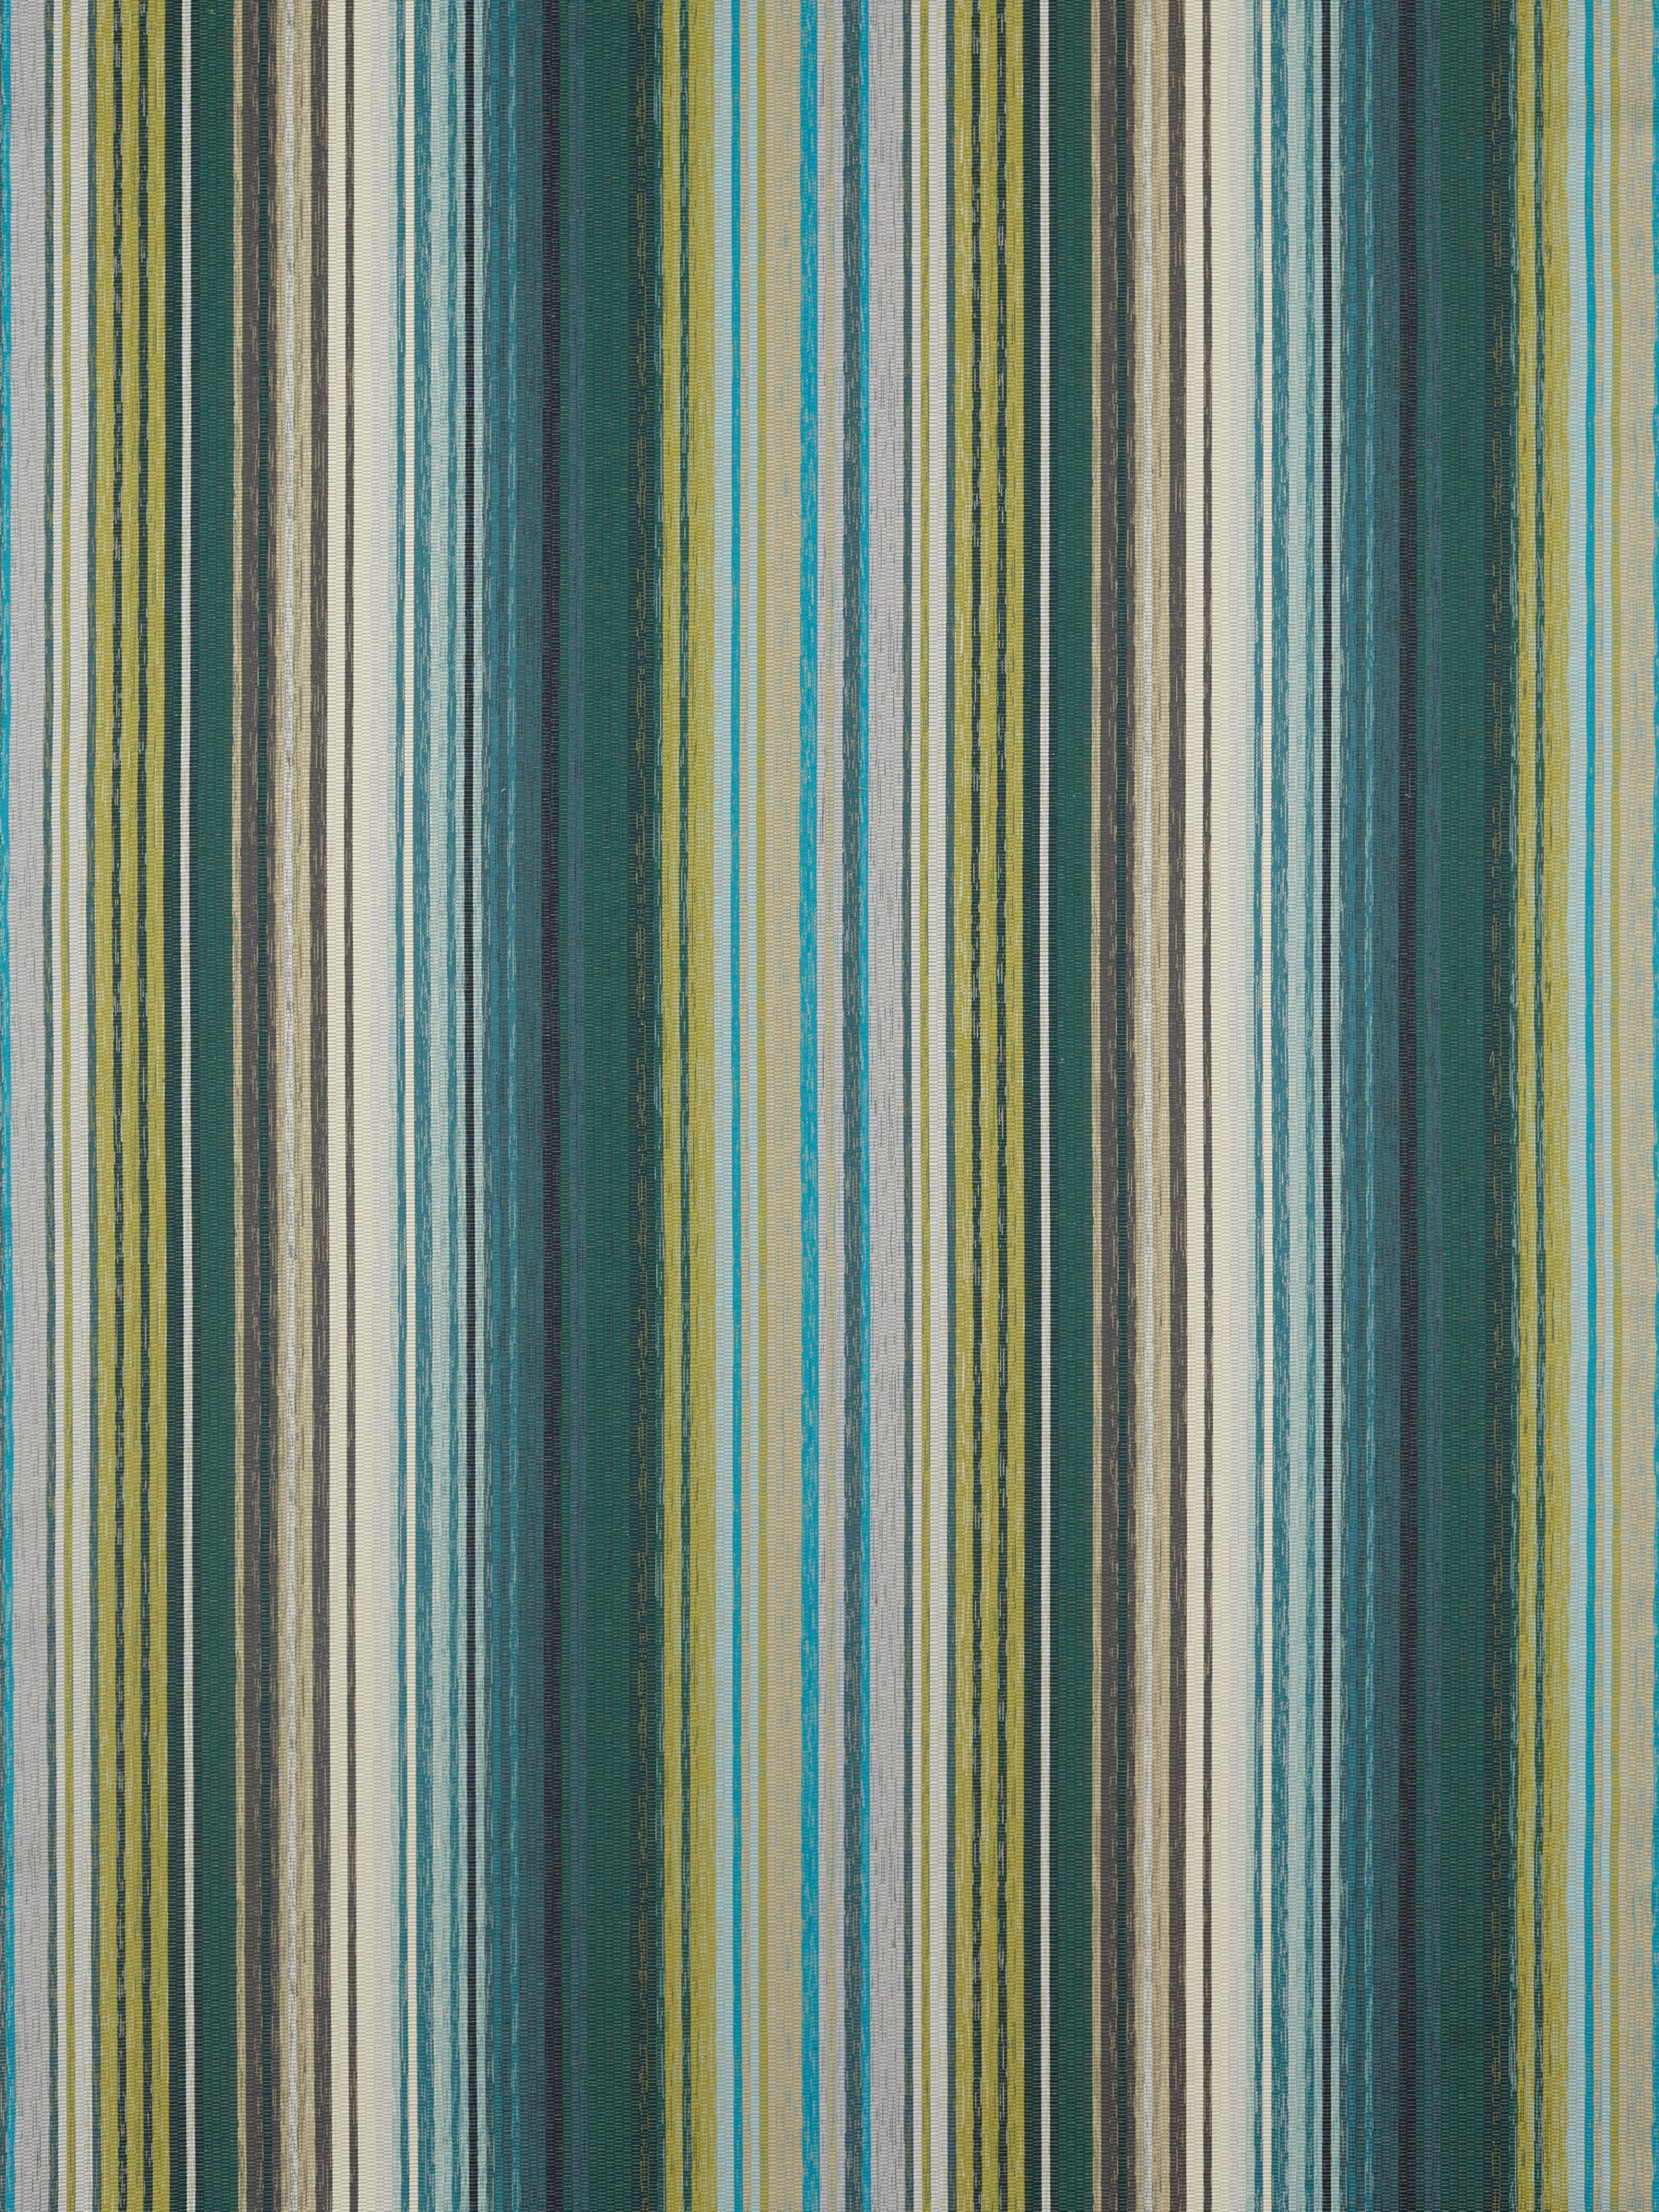 Harlequin Spectro Stripe Made to Measure Curtains or Roman Blind, Emerald